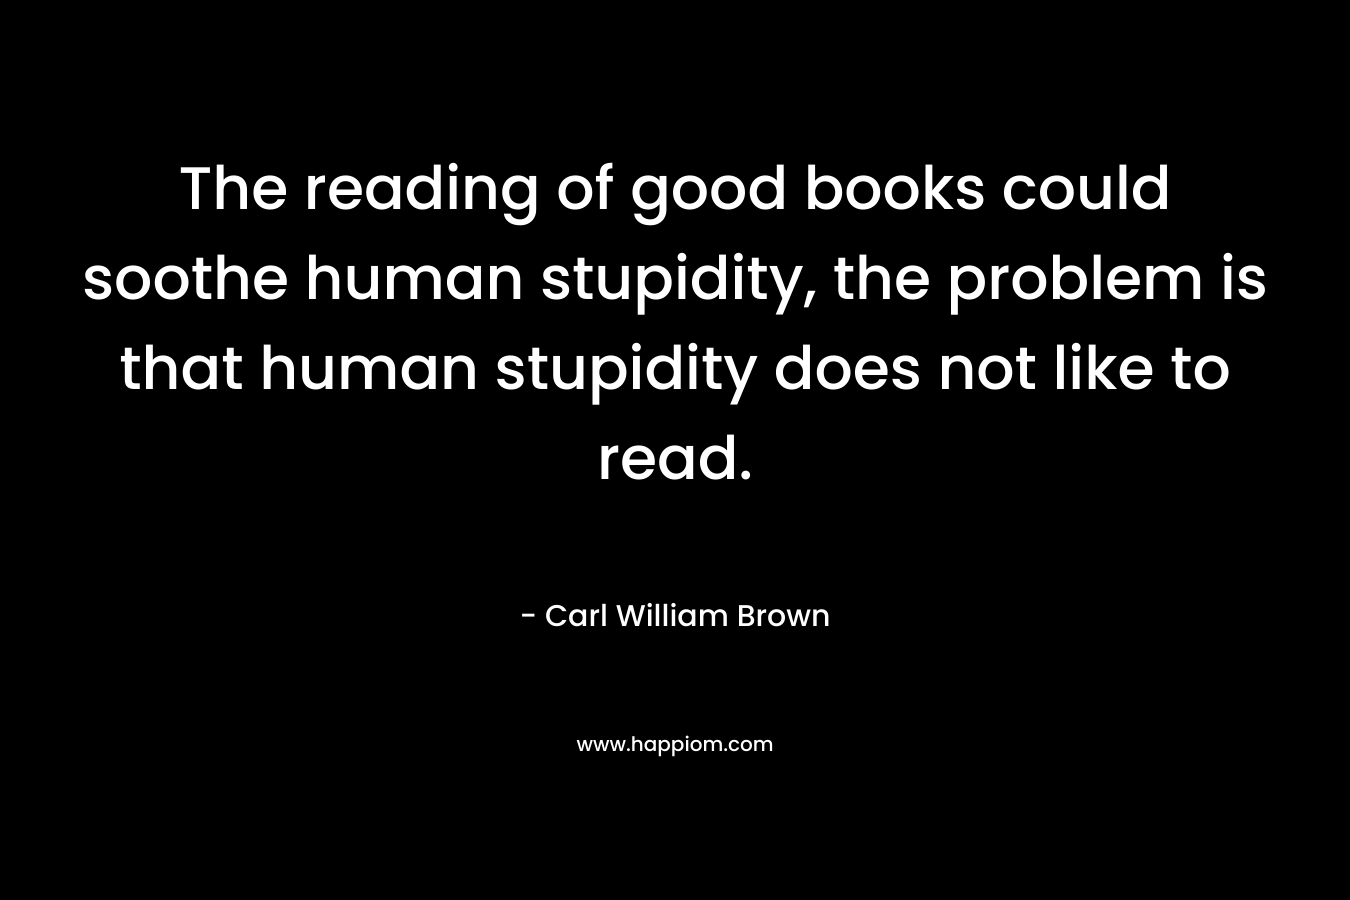 The reading of good books could soothe human stupidity, the problem is that human stupidity does not like to read.